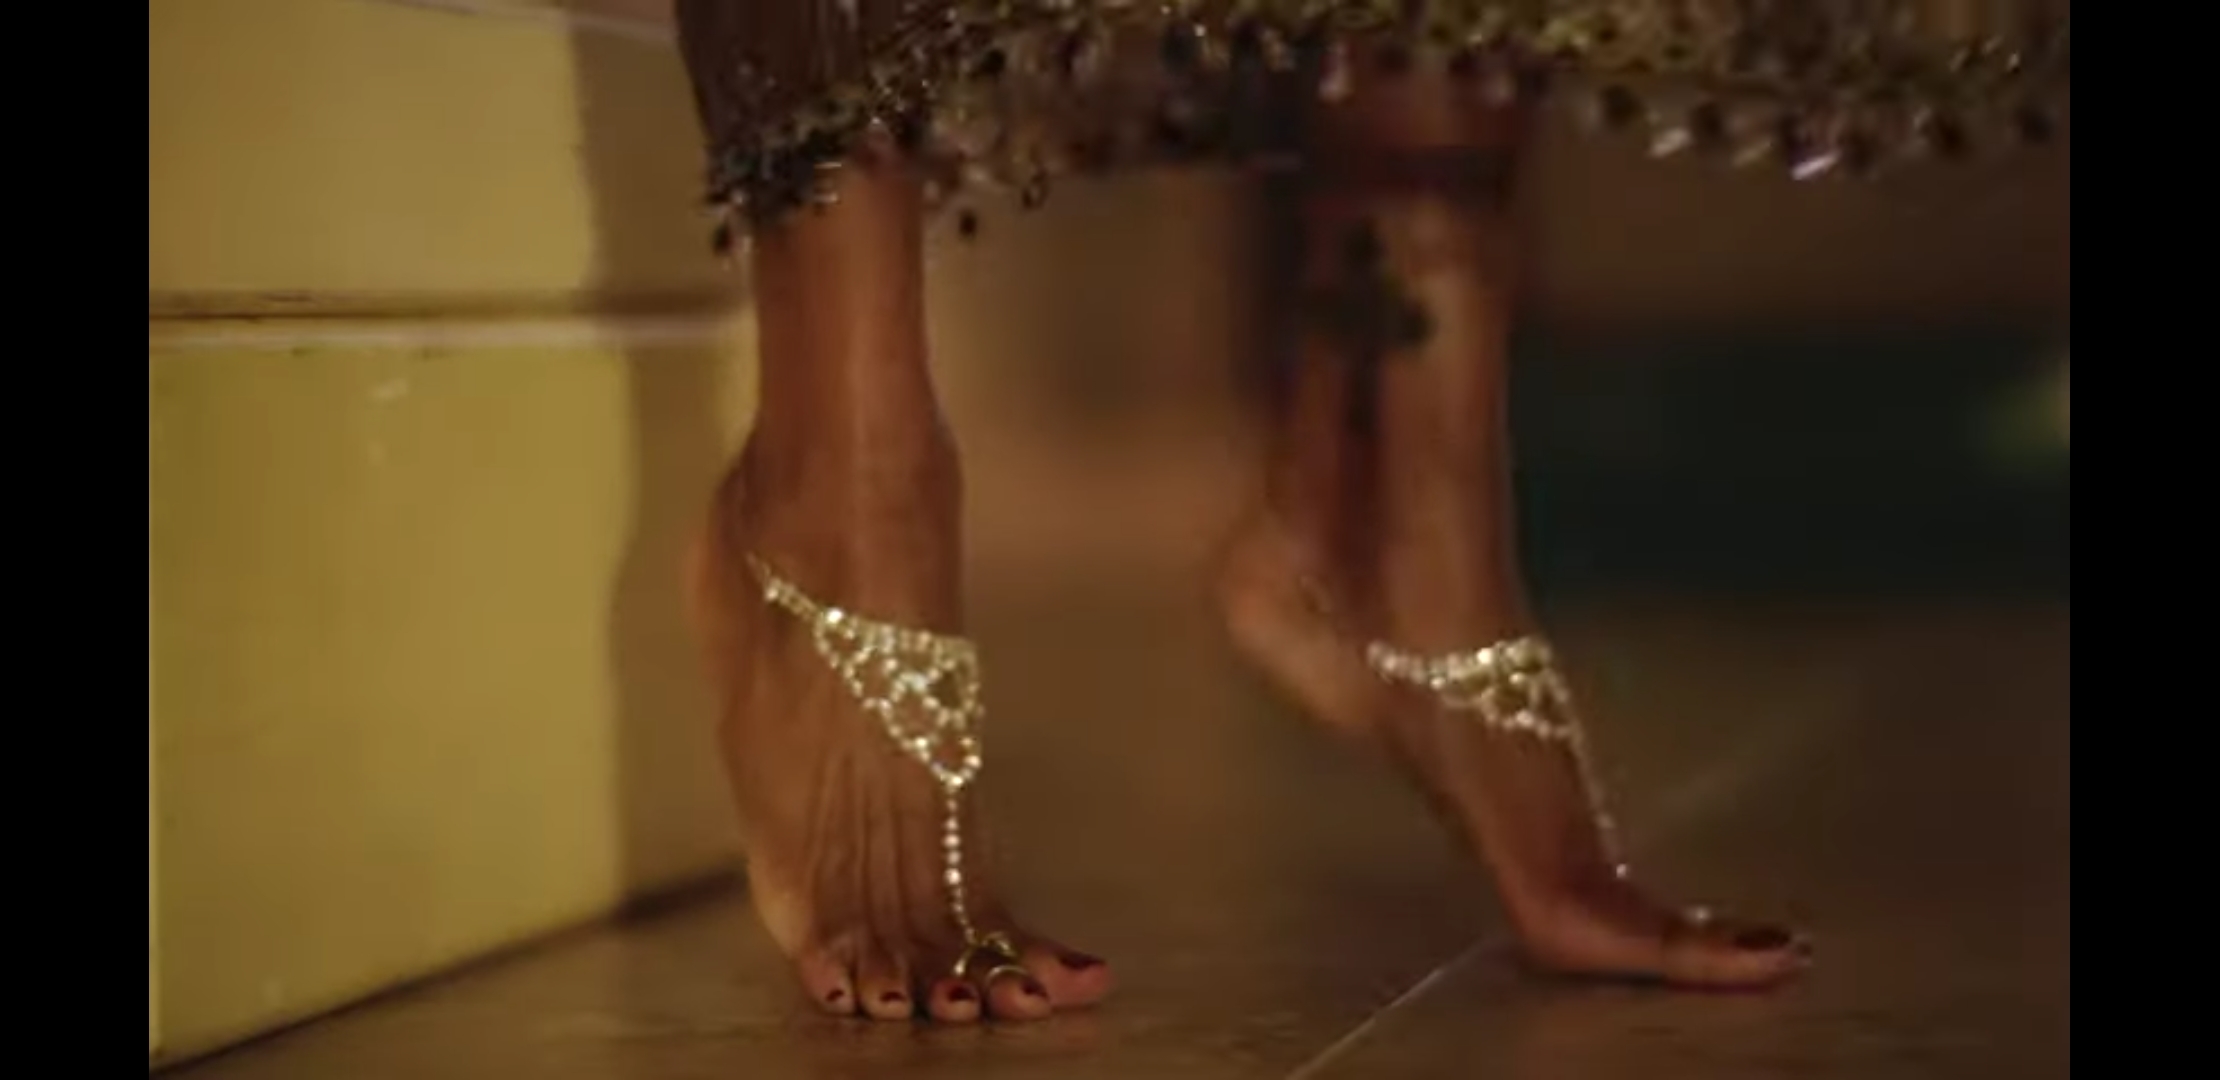 People who liked Stacey Dash's feet, also liked.